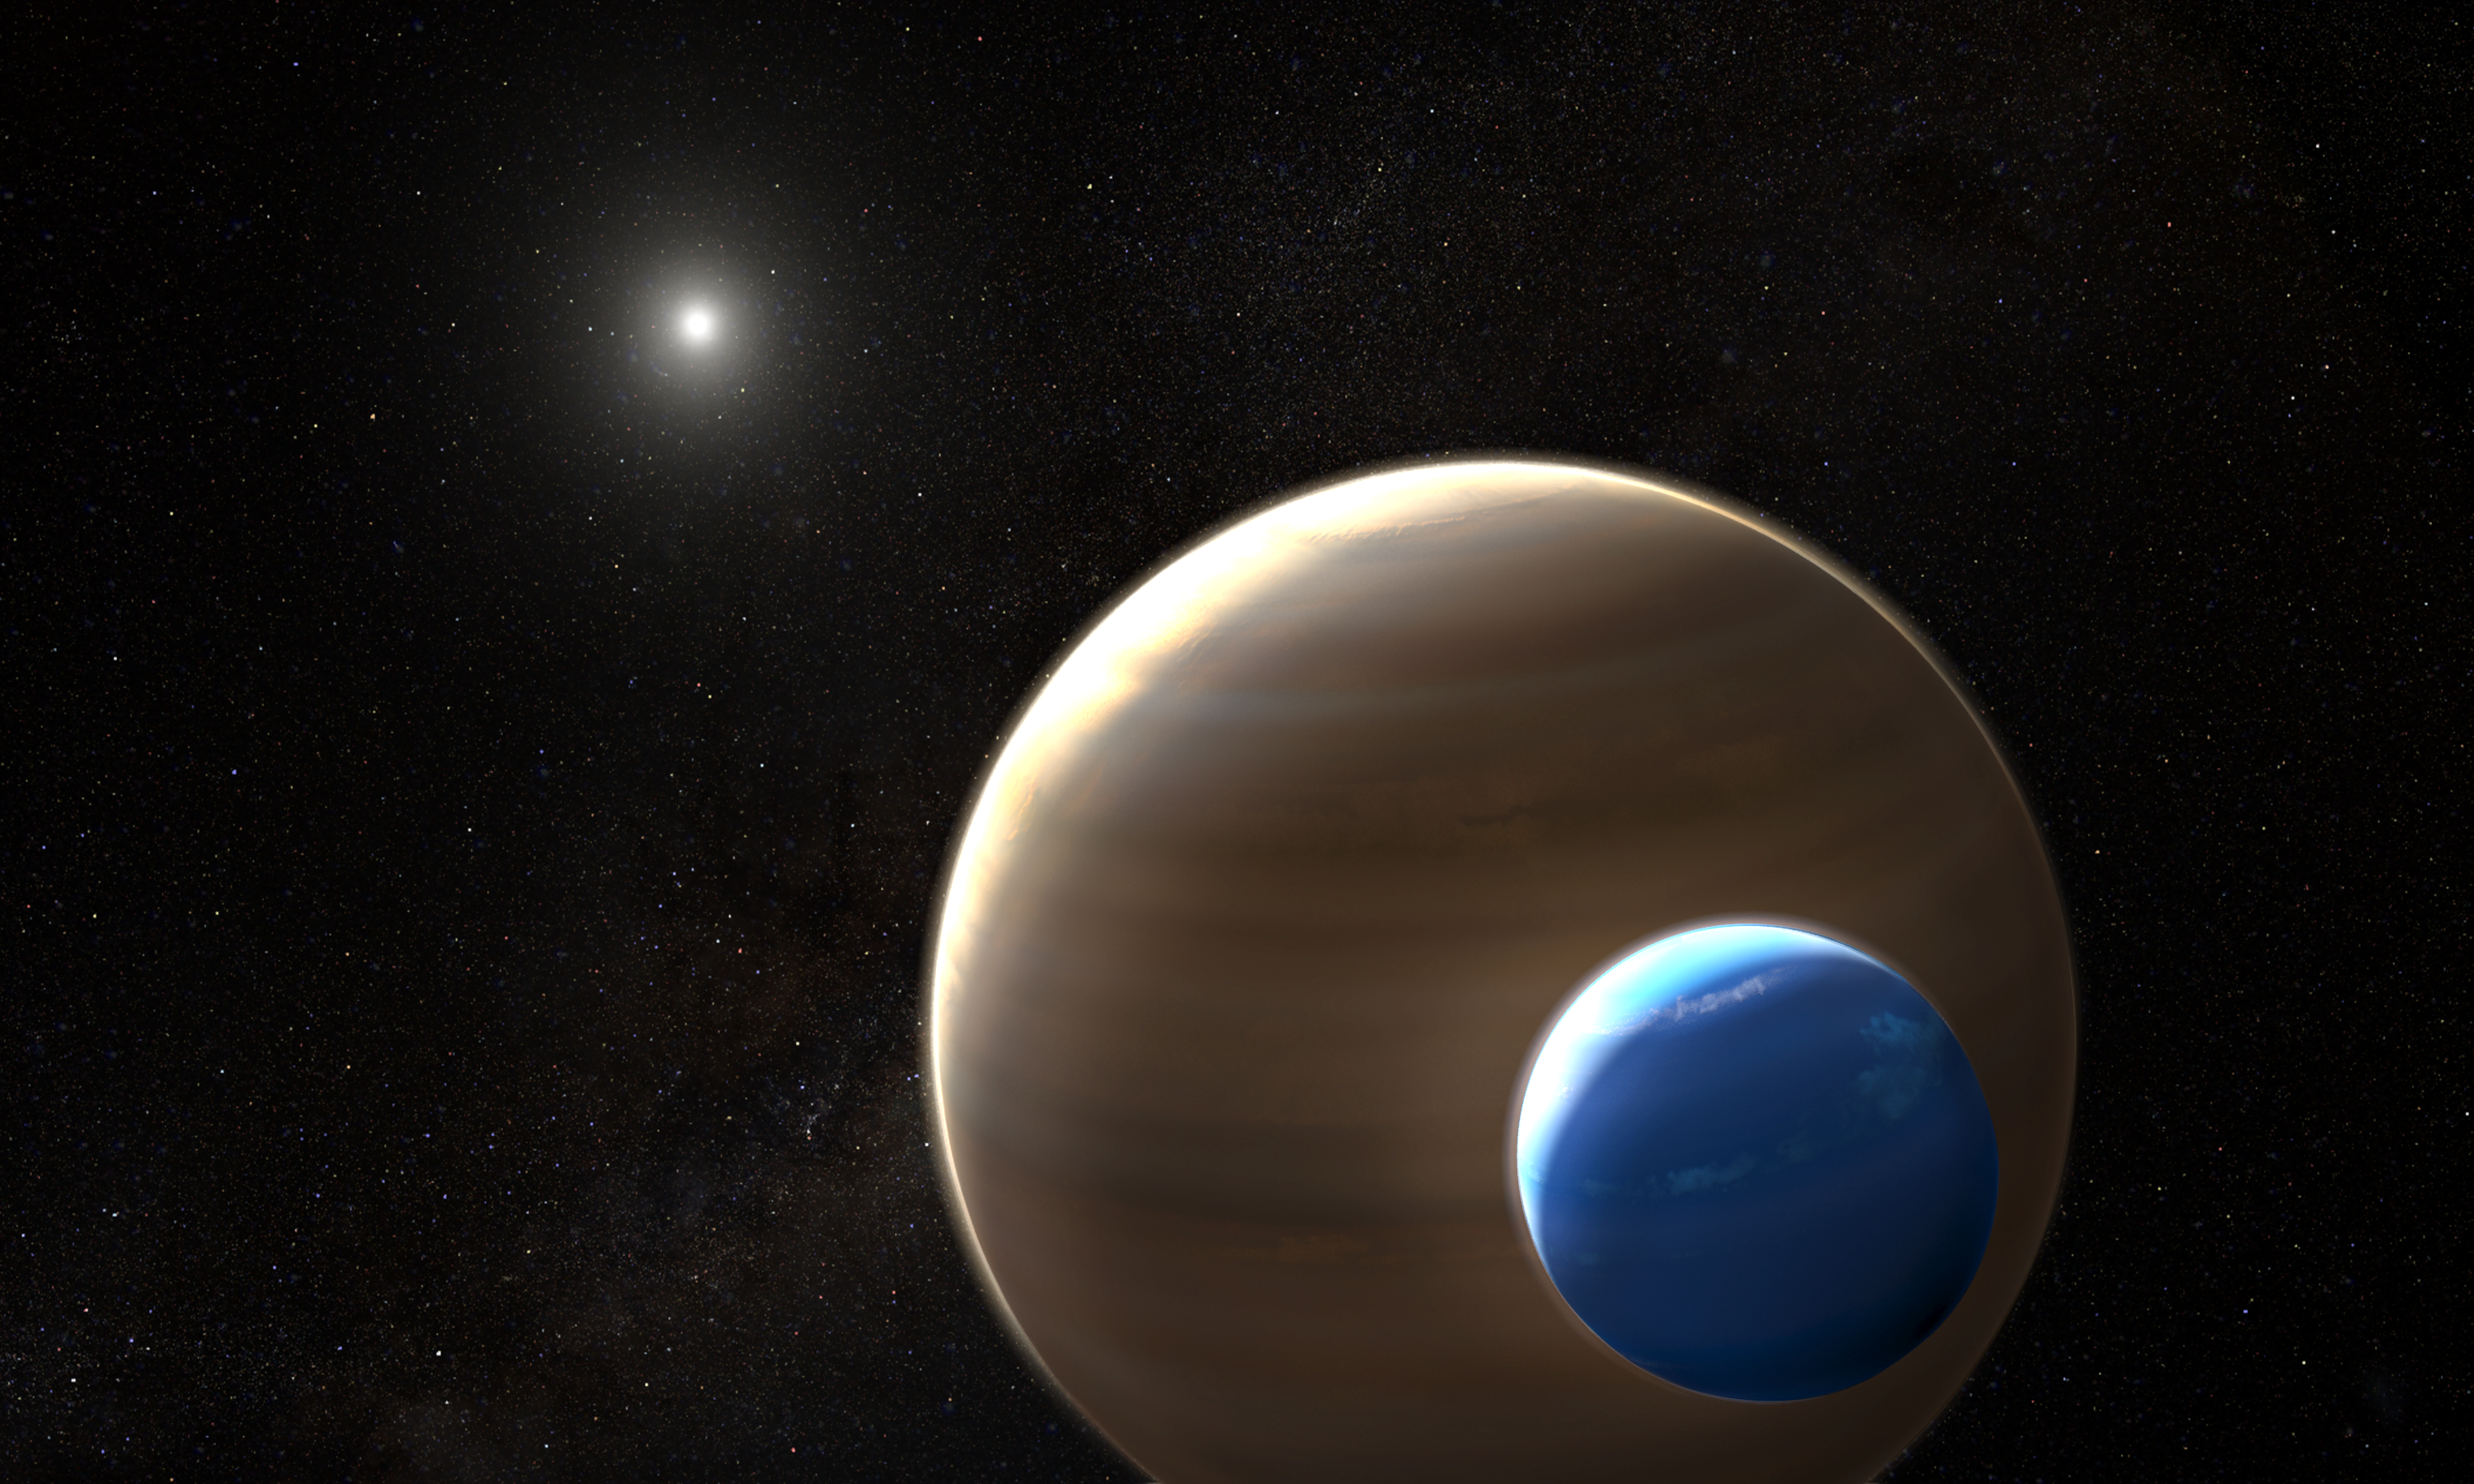 artist concept: A distant star off to the upper left. A large banded world is in the foreground. In front of it is a smaller, blue world.